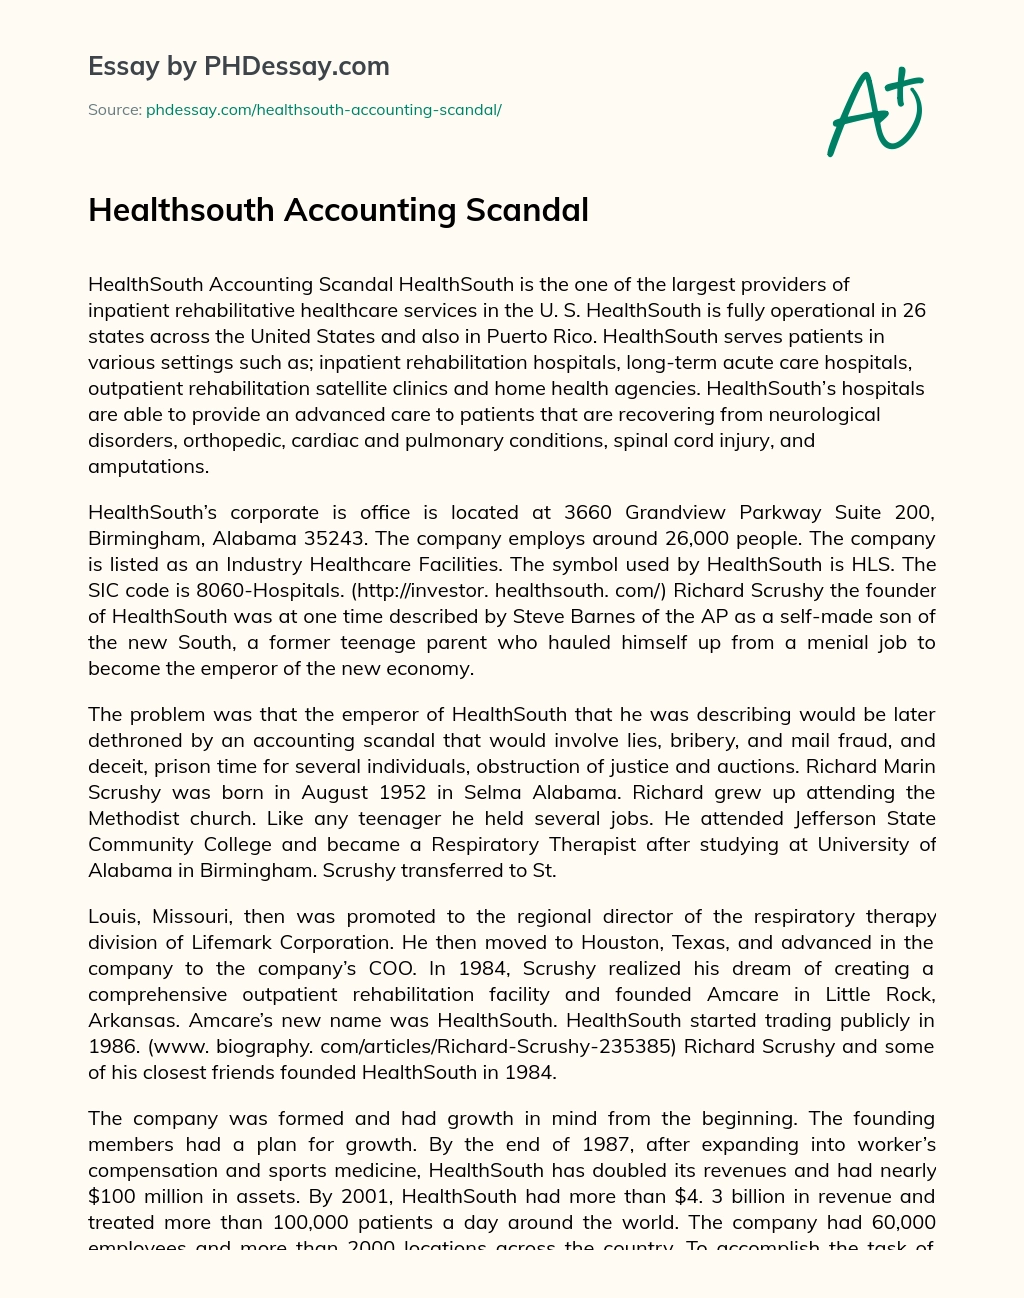 Healthsouth Accounting Scandal essay